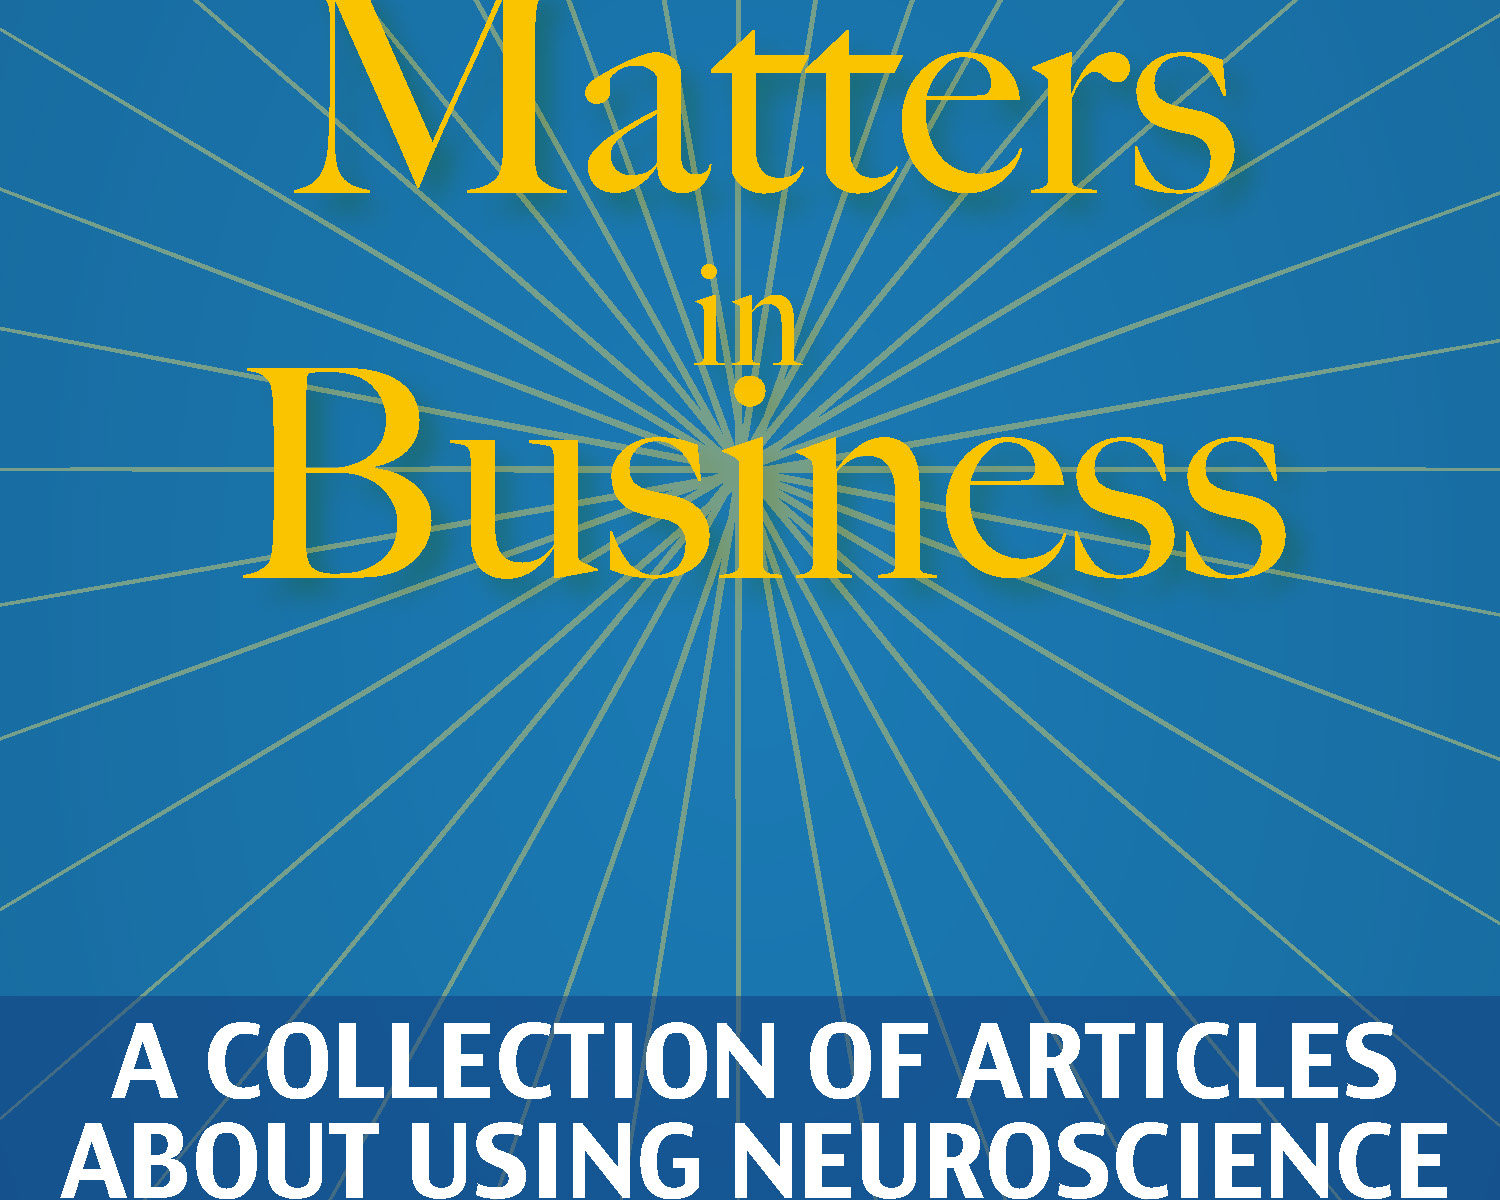 Brain Matters in Business cover